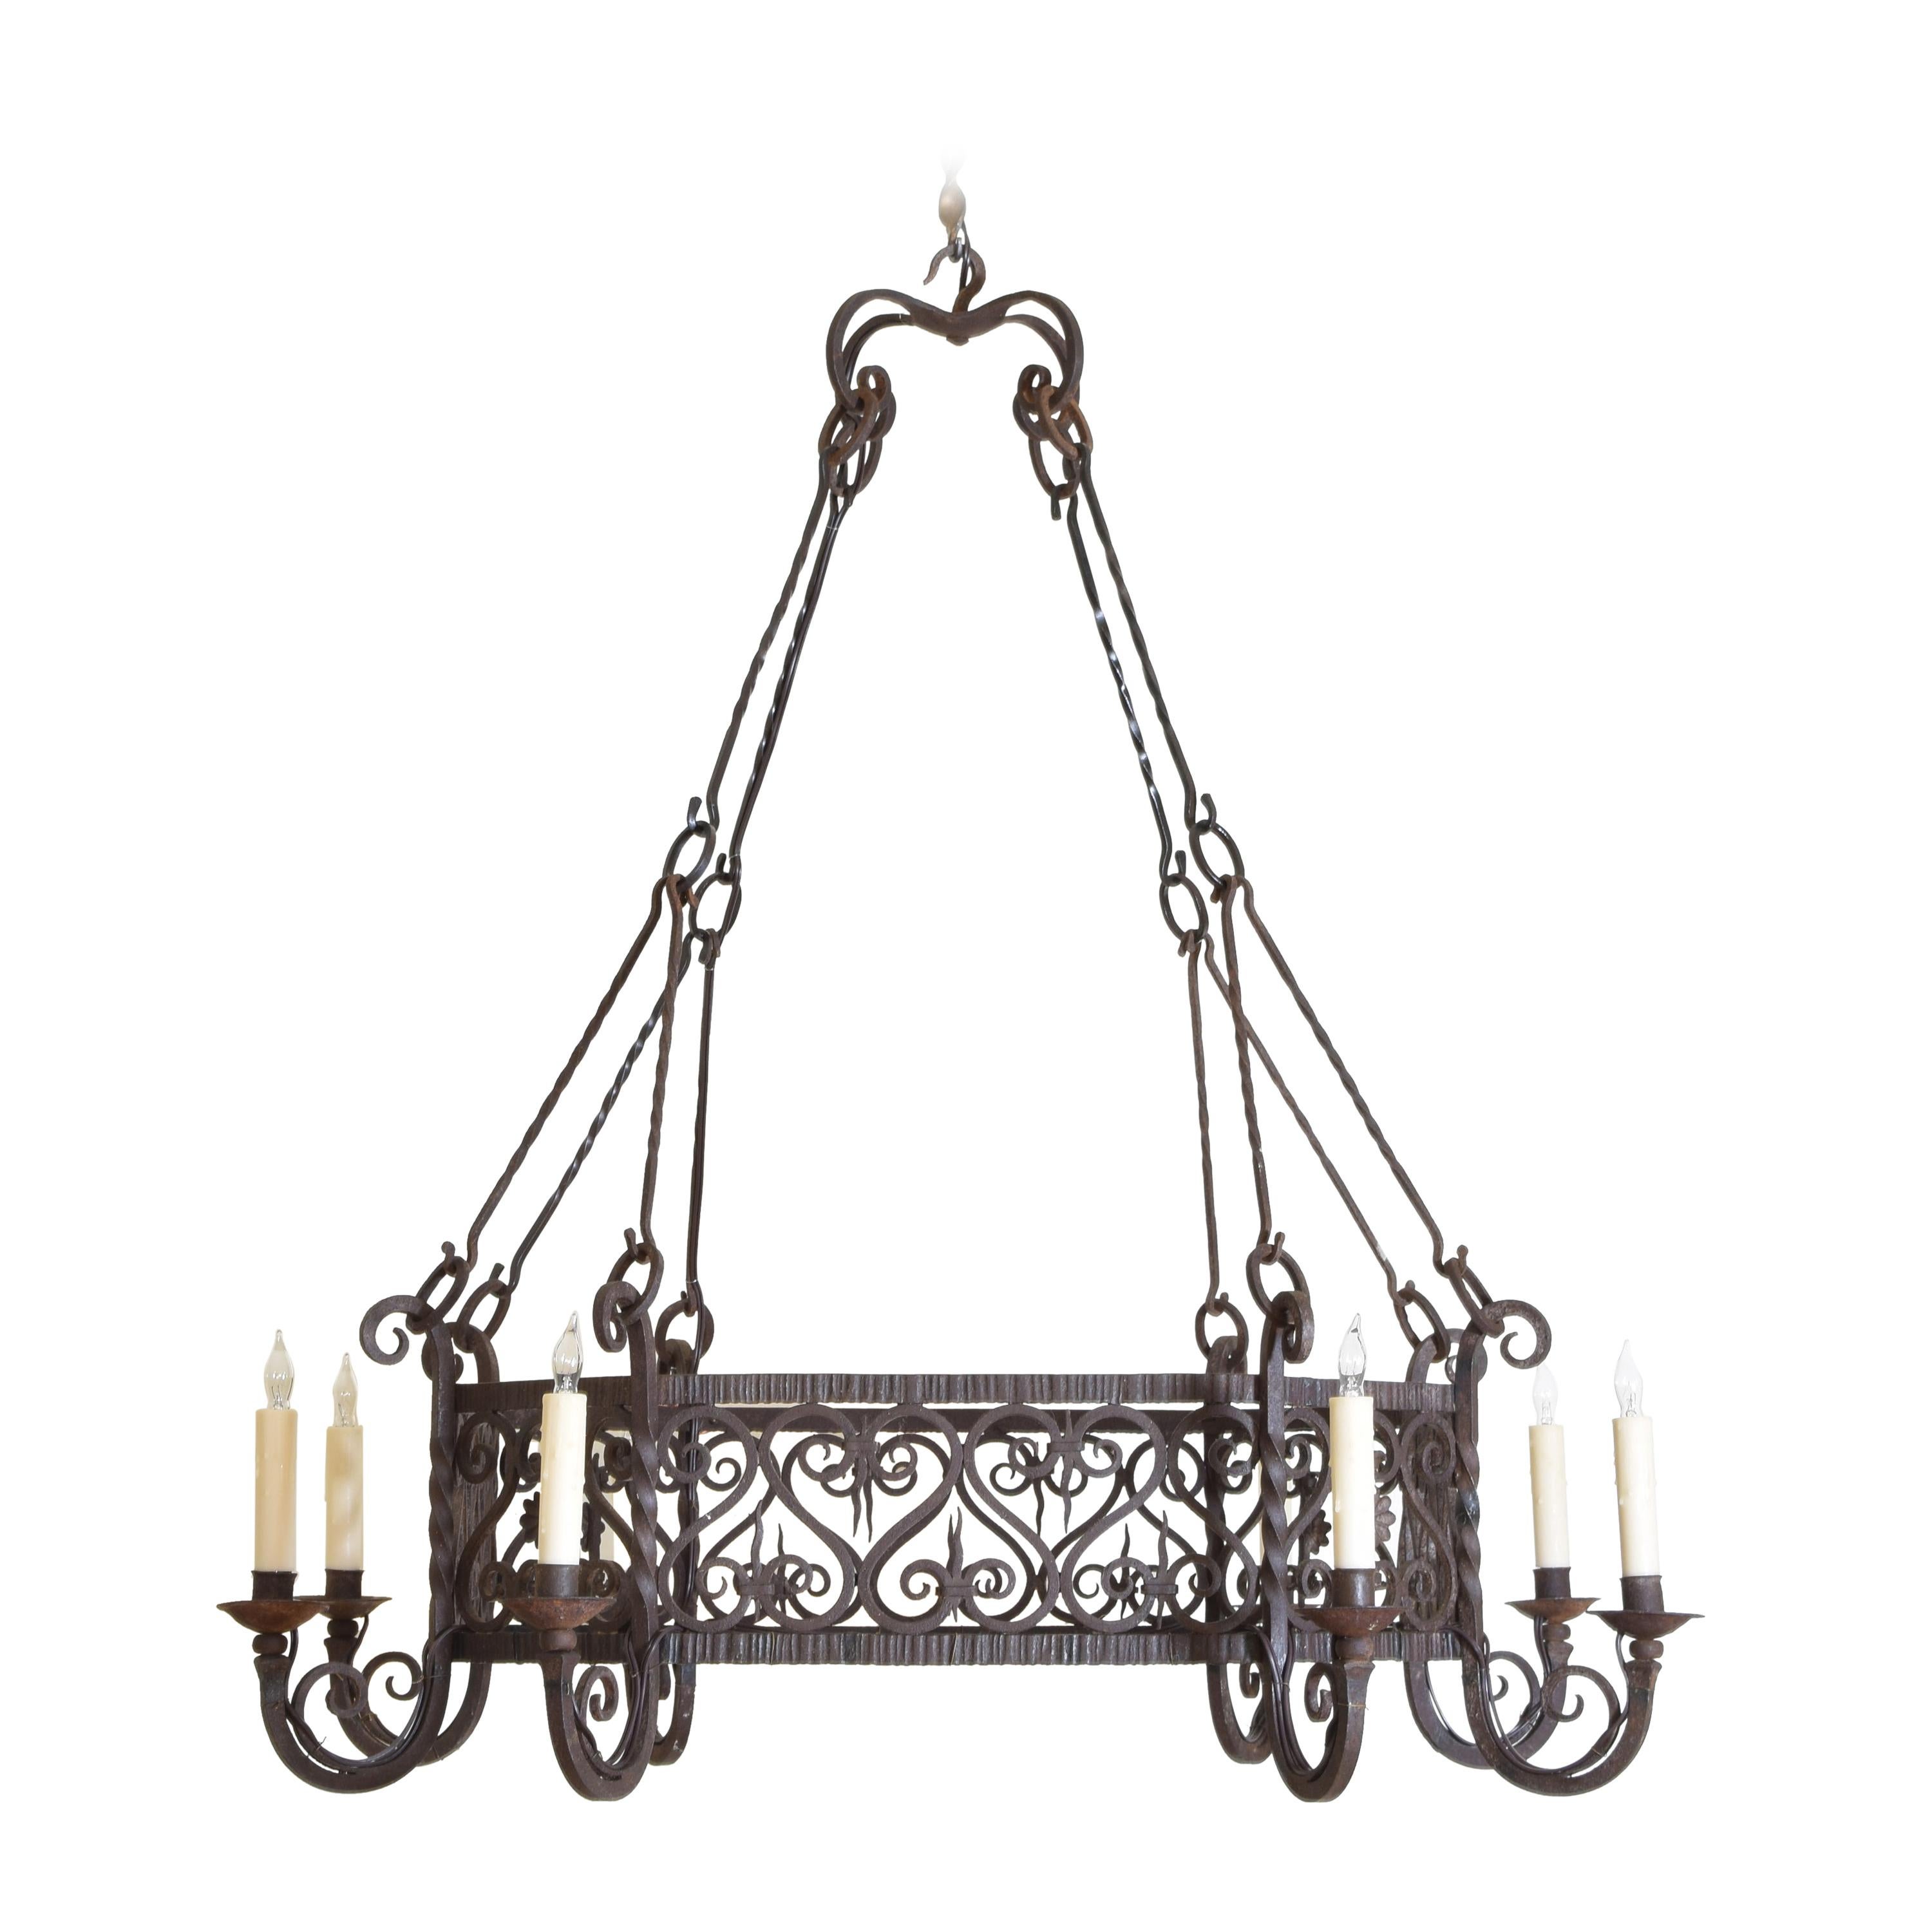 French Baroque Revival Wrought Iron Octagonal 8-Light Chandelier 19th Century